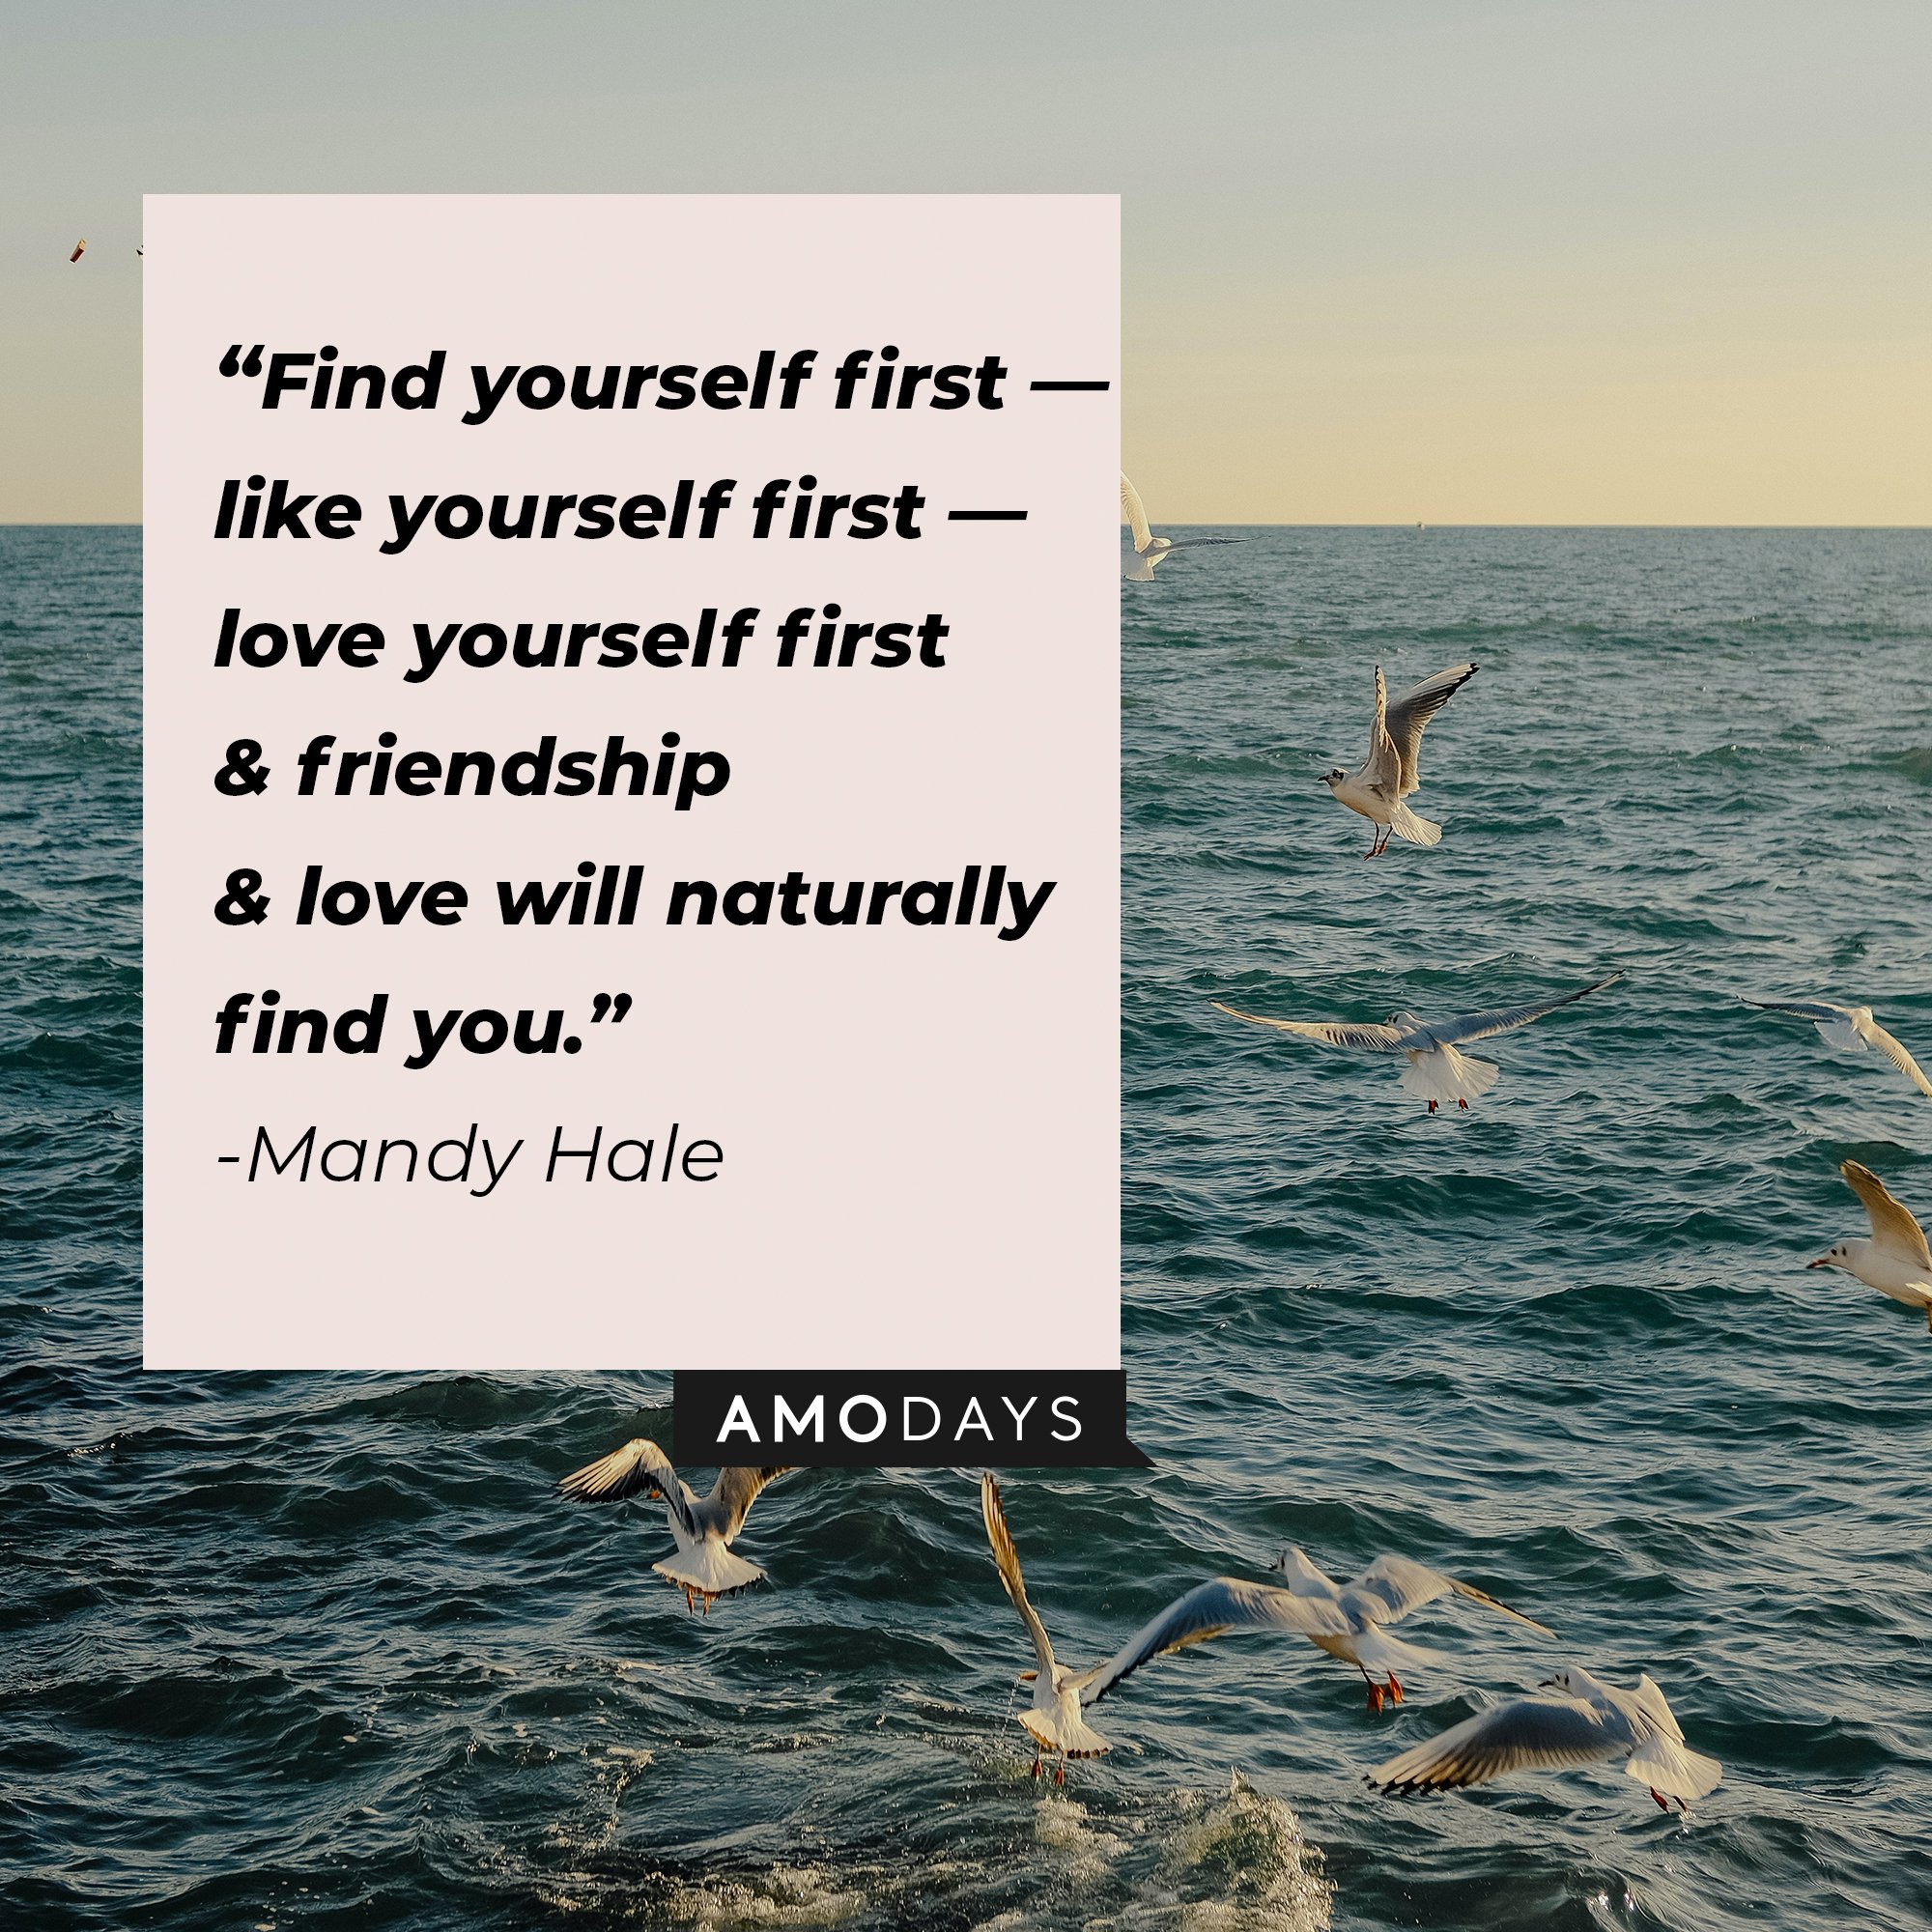 Mandy Hale's quote: “Find yourself first — like yourself first — love yourself first & friendship & love will naturally find you.”  | Image: AmoDays